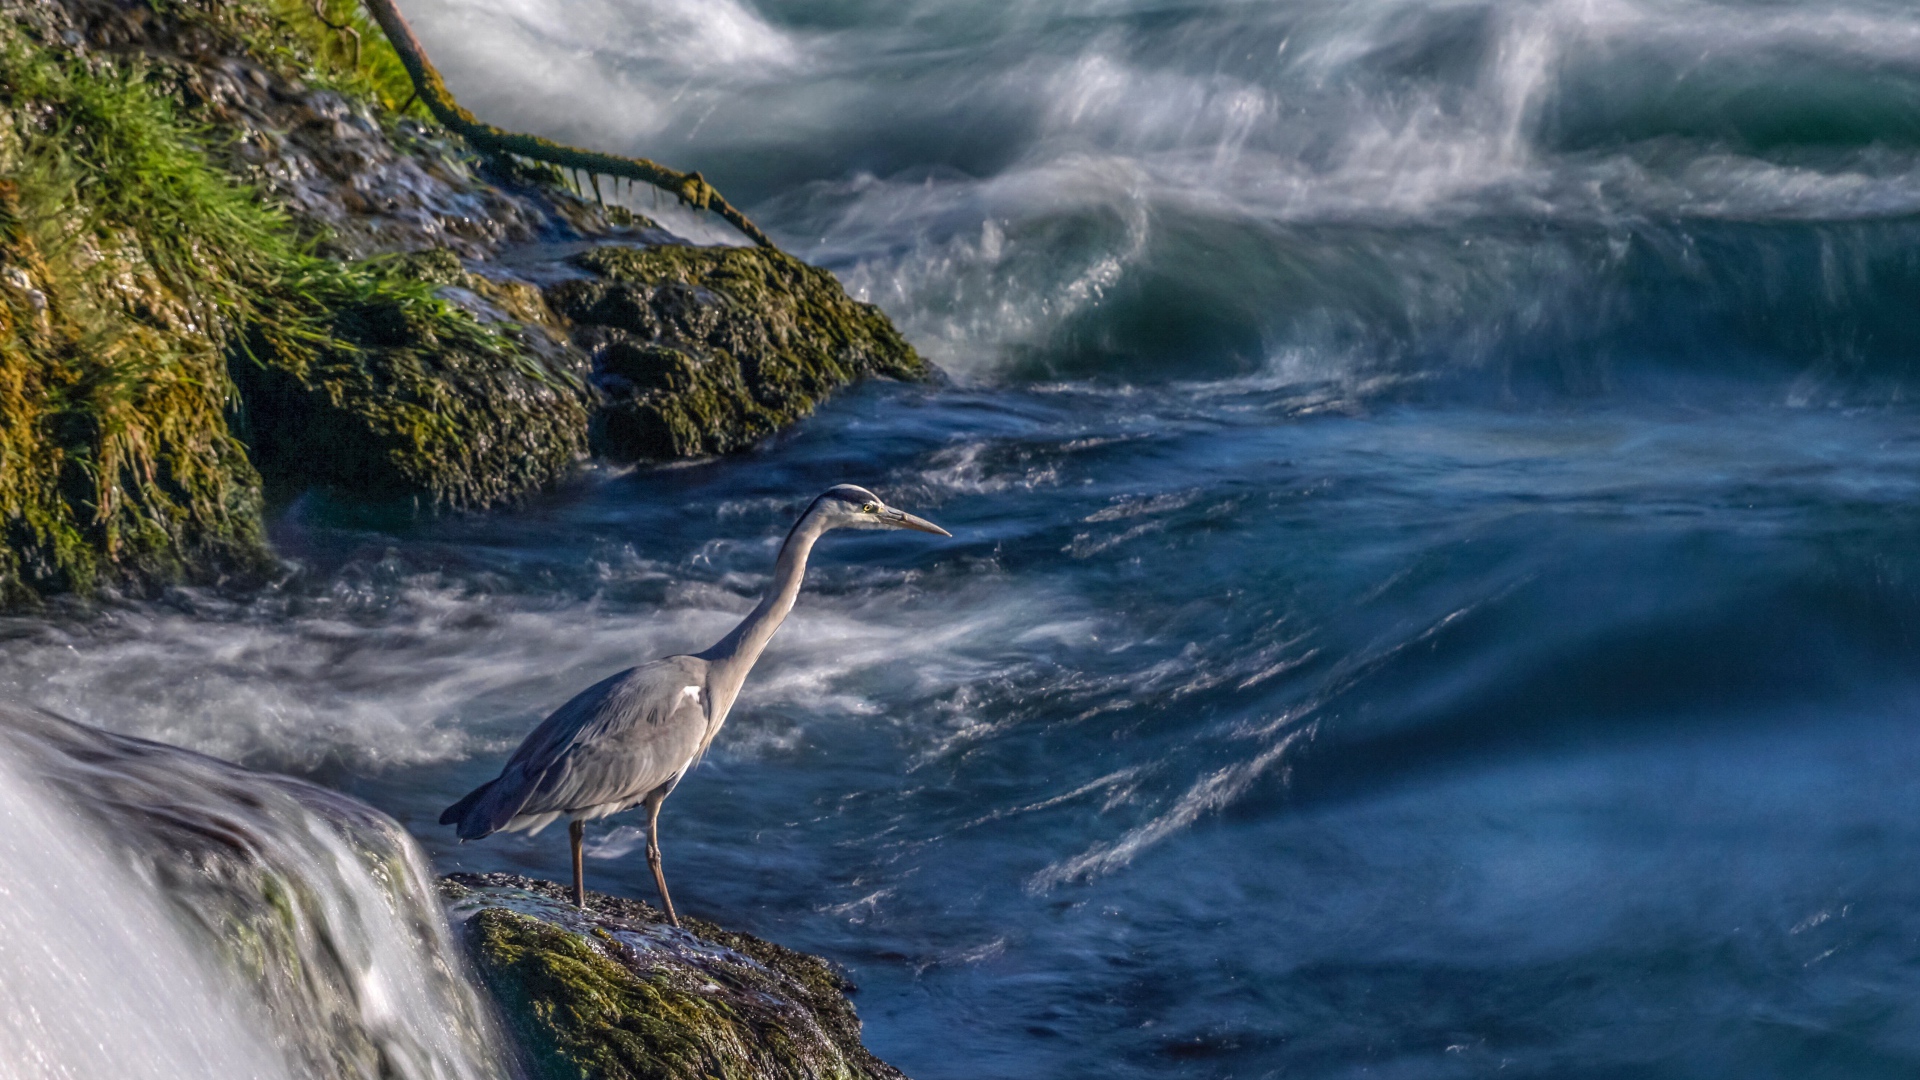 A gray heron stands on a stone by the sea